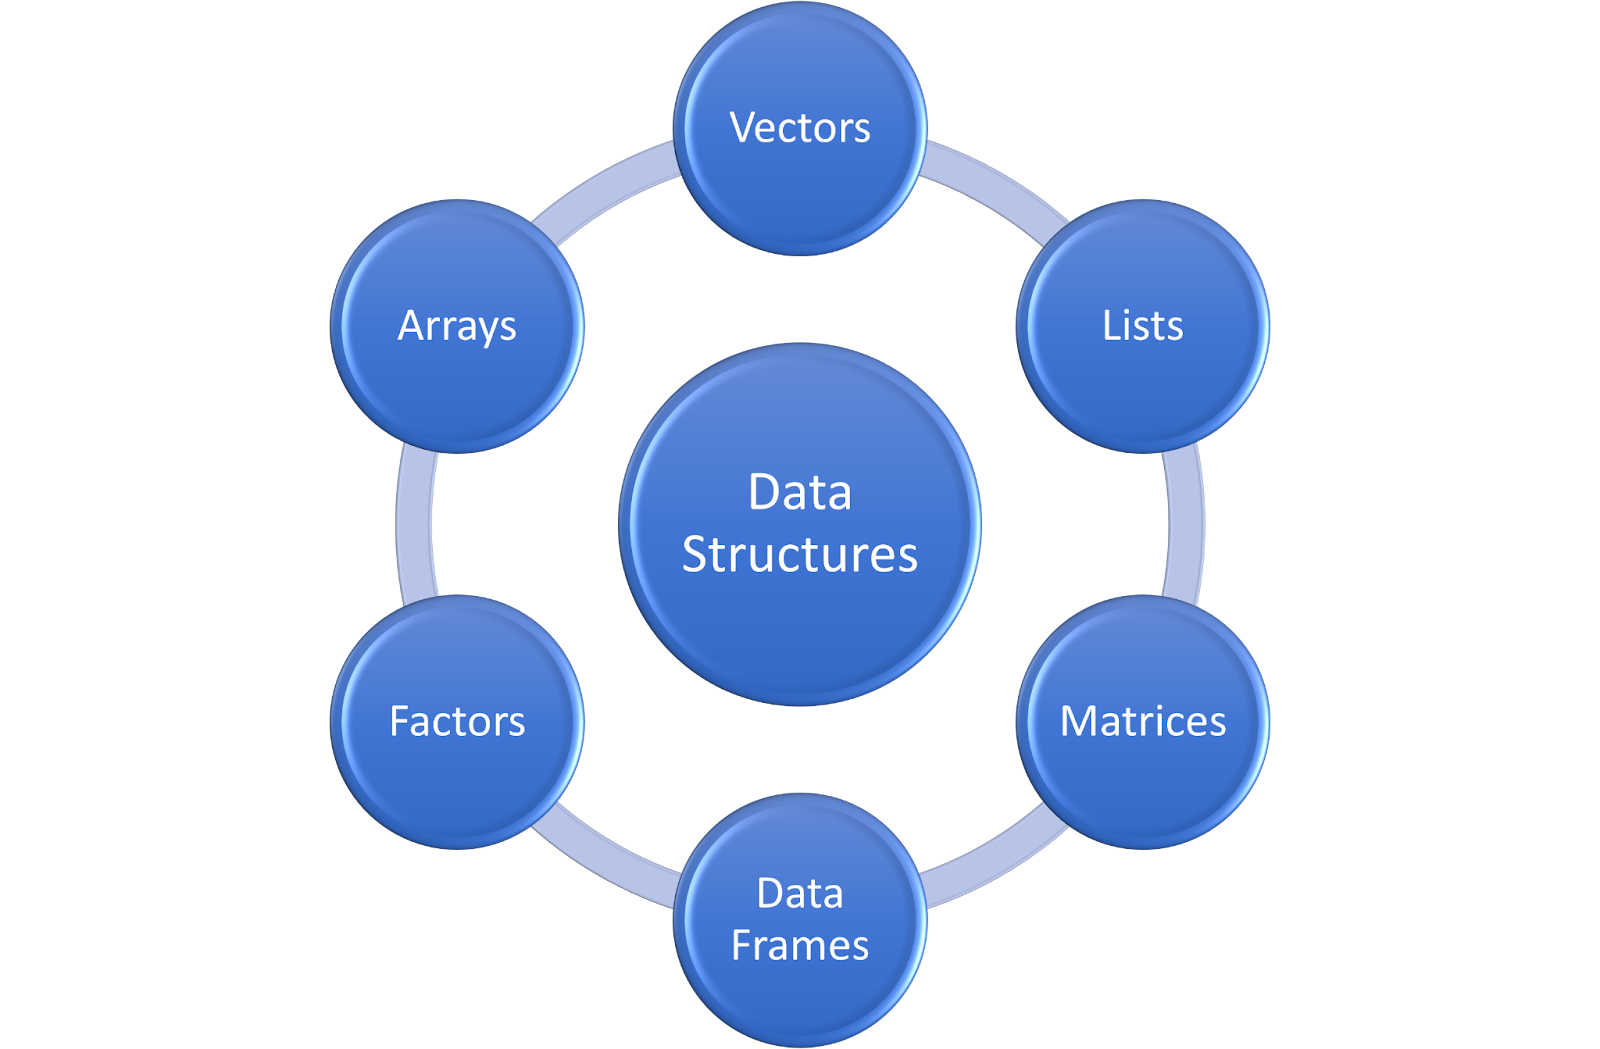 Data structures in R